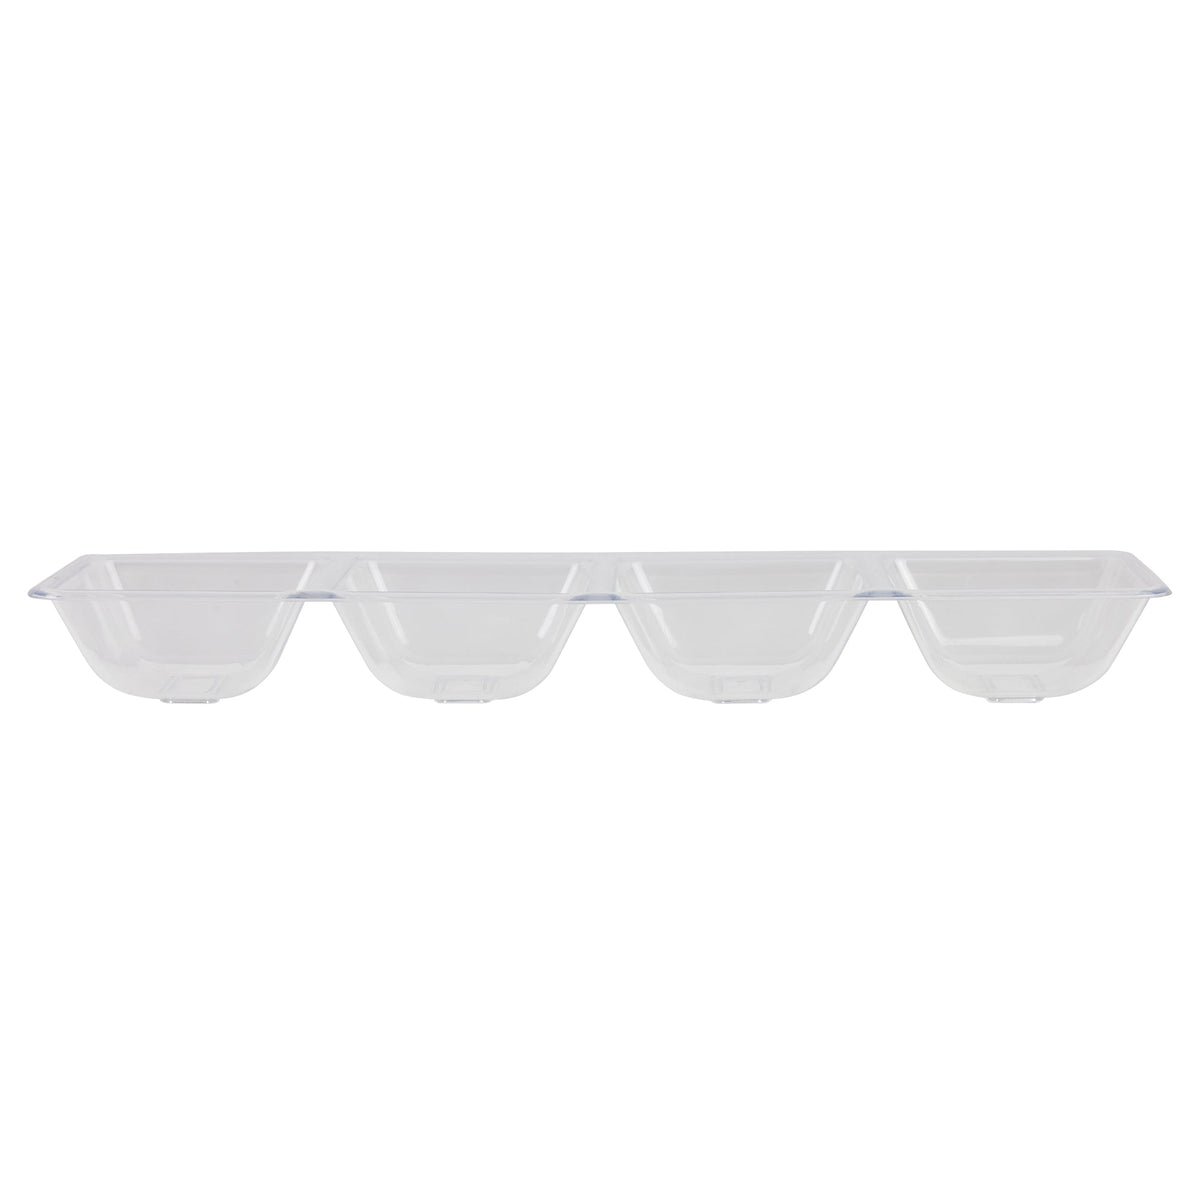 MADISON IMPORTS Disposable-Plasticware Clear 4 compartment Tray